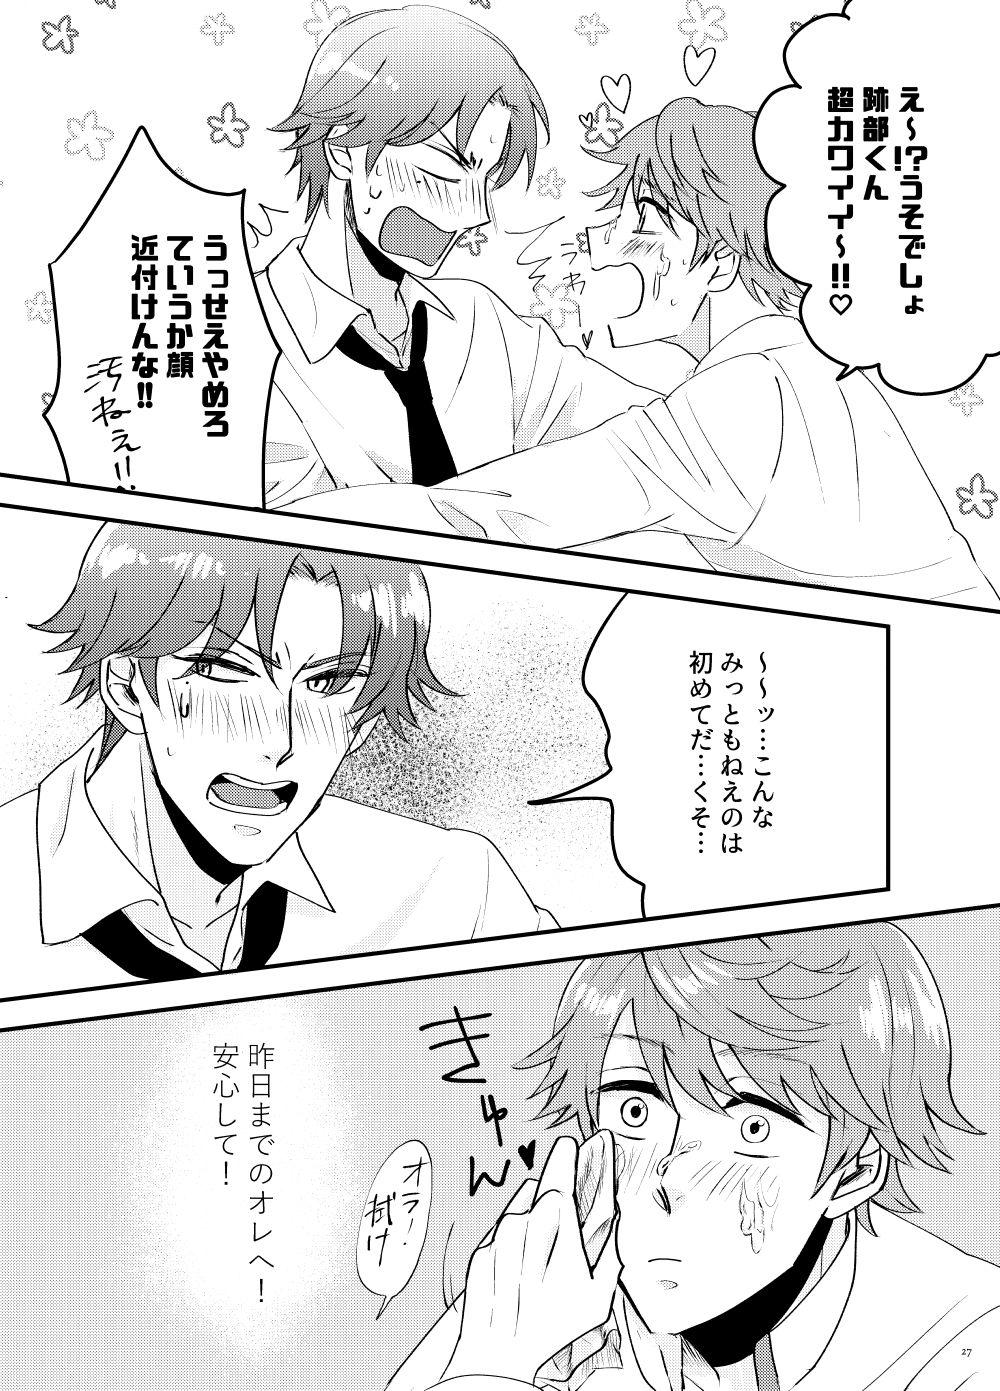 Cunnilingus How to A? - Prince of tennis Banho - Page 25